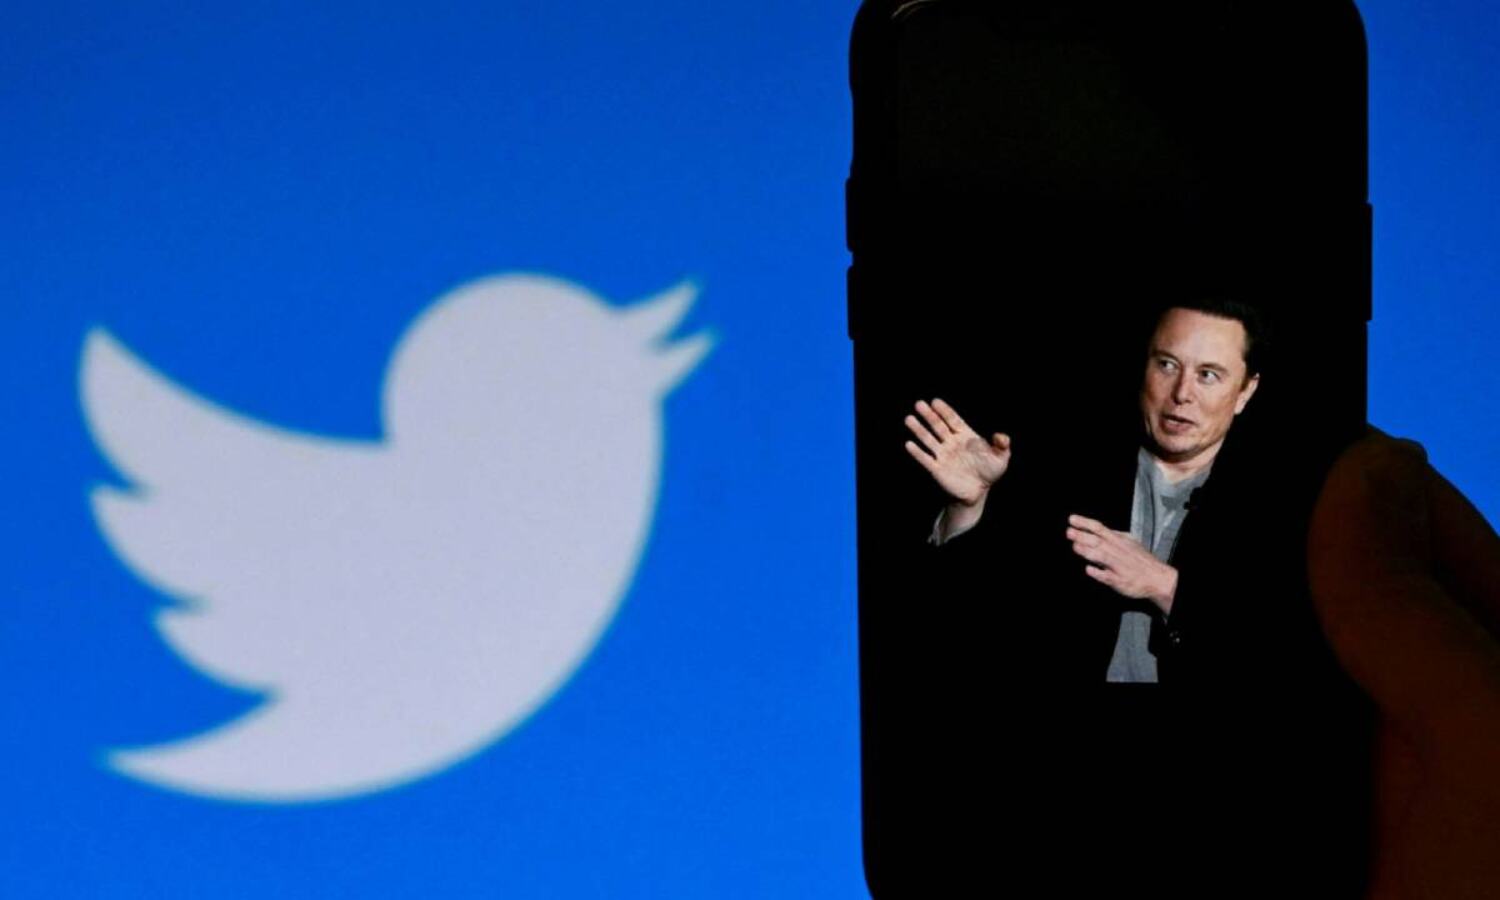 Elon Musk announces a new Twitter feature and announces that 1.5 billion accounts will be deleted